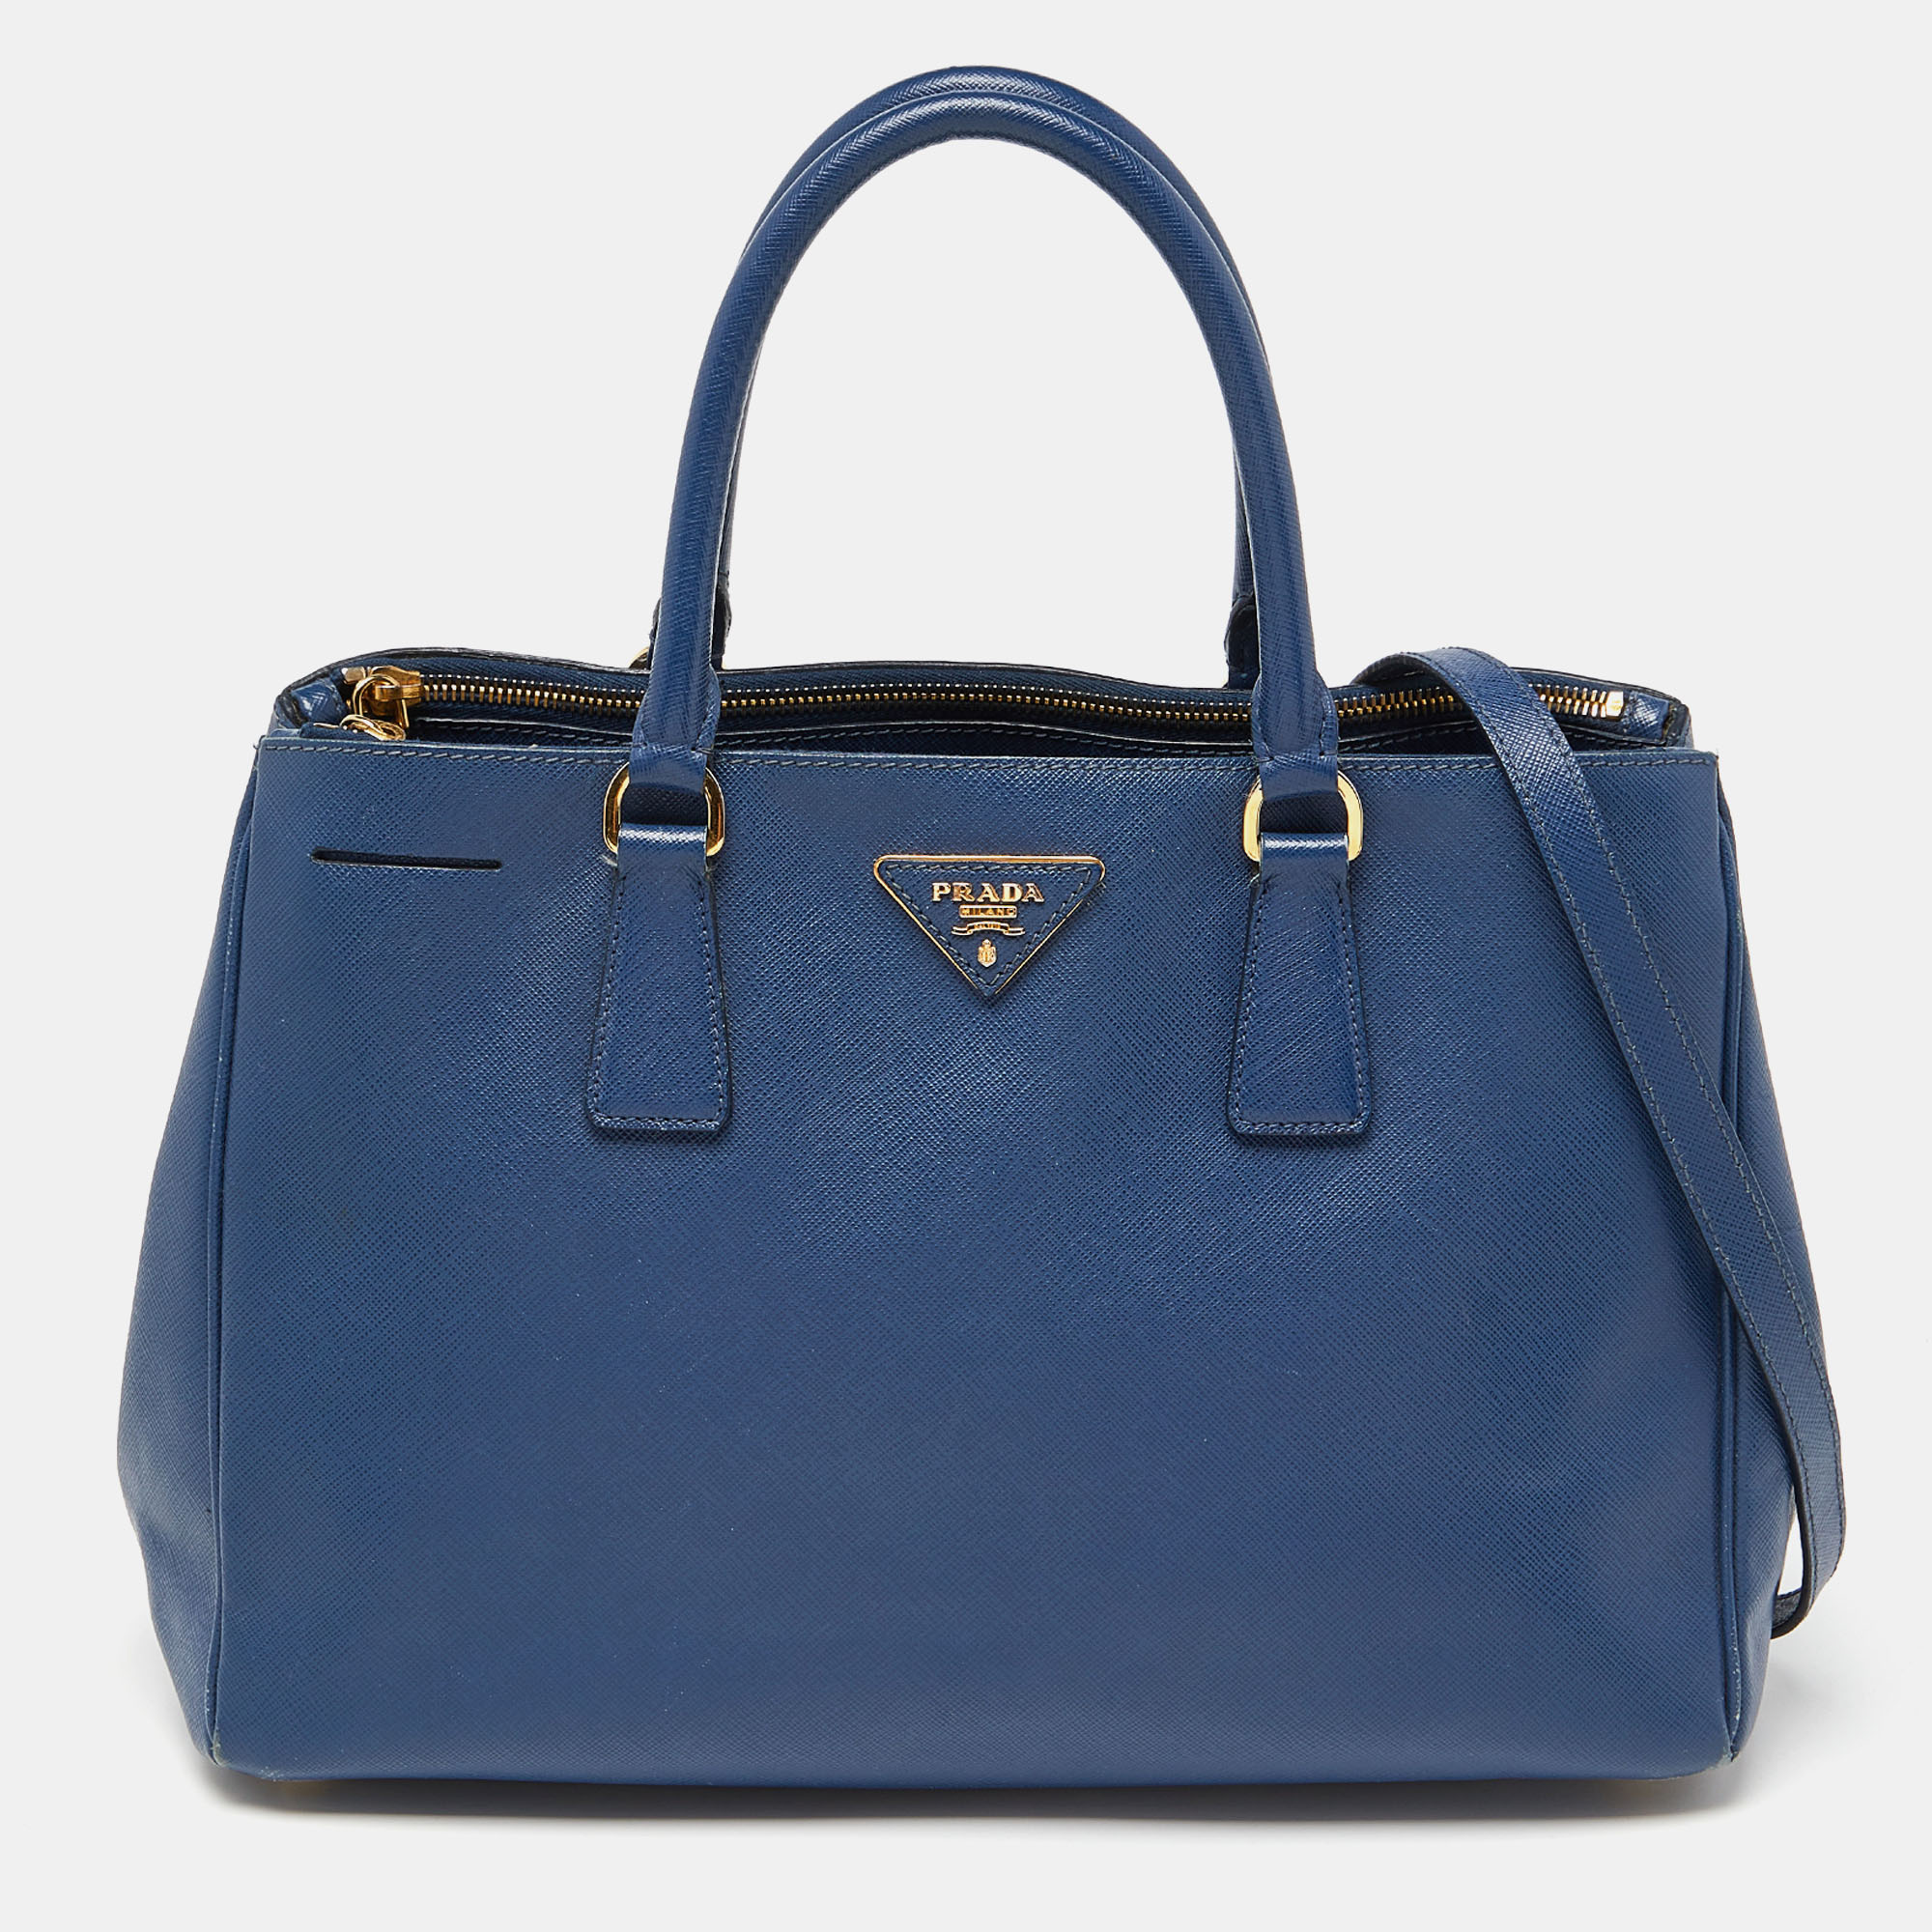 Pre-owned Prada Blue Saffiano Lux Leather Large Galleria Double Zip Tote